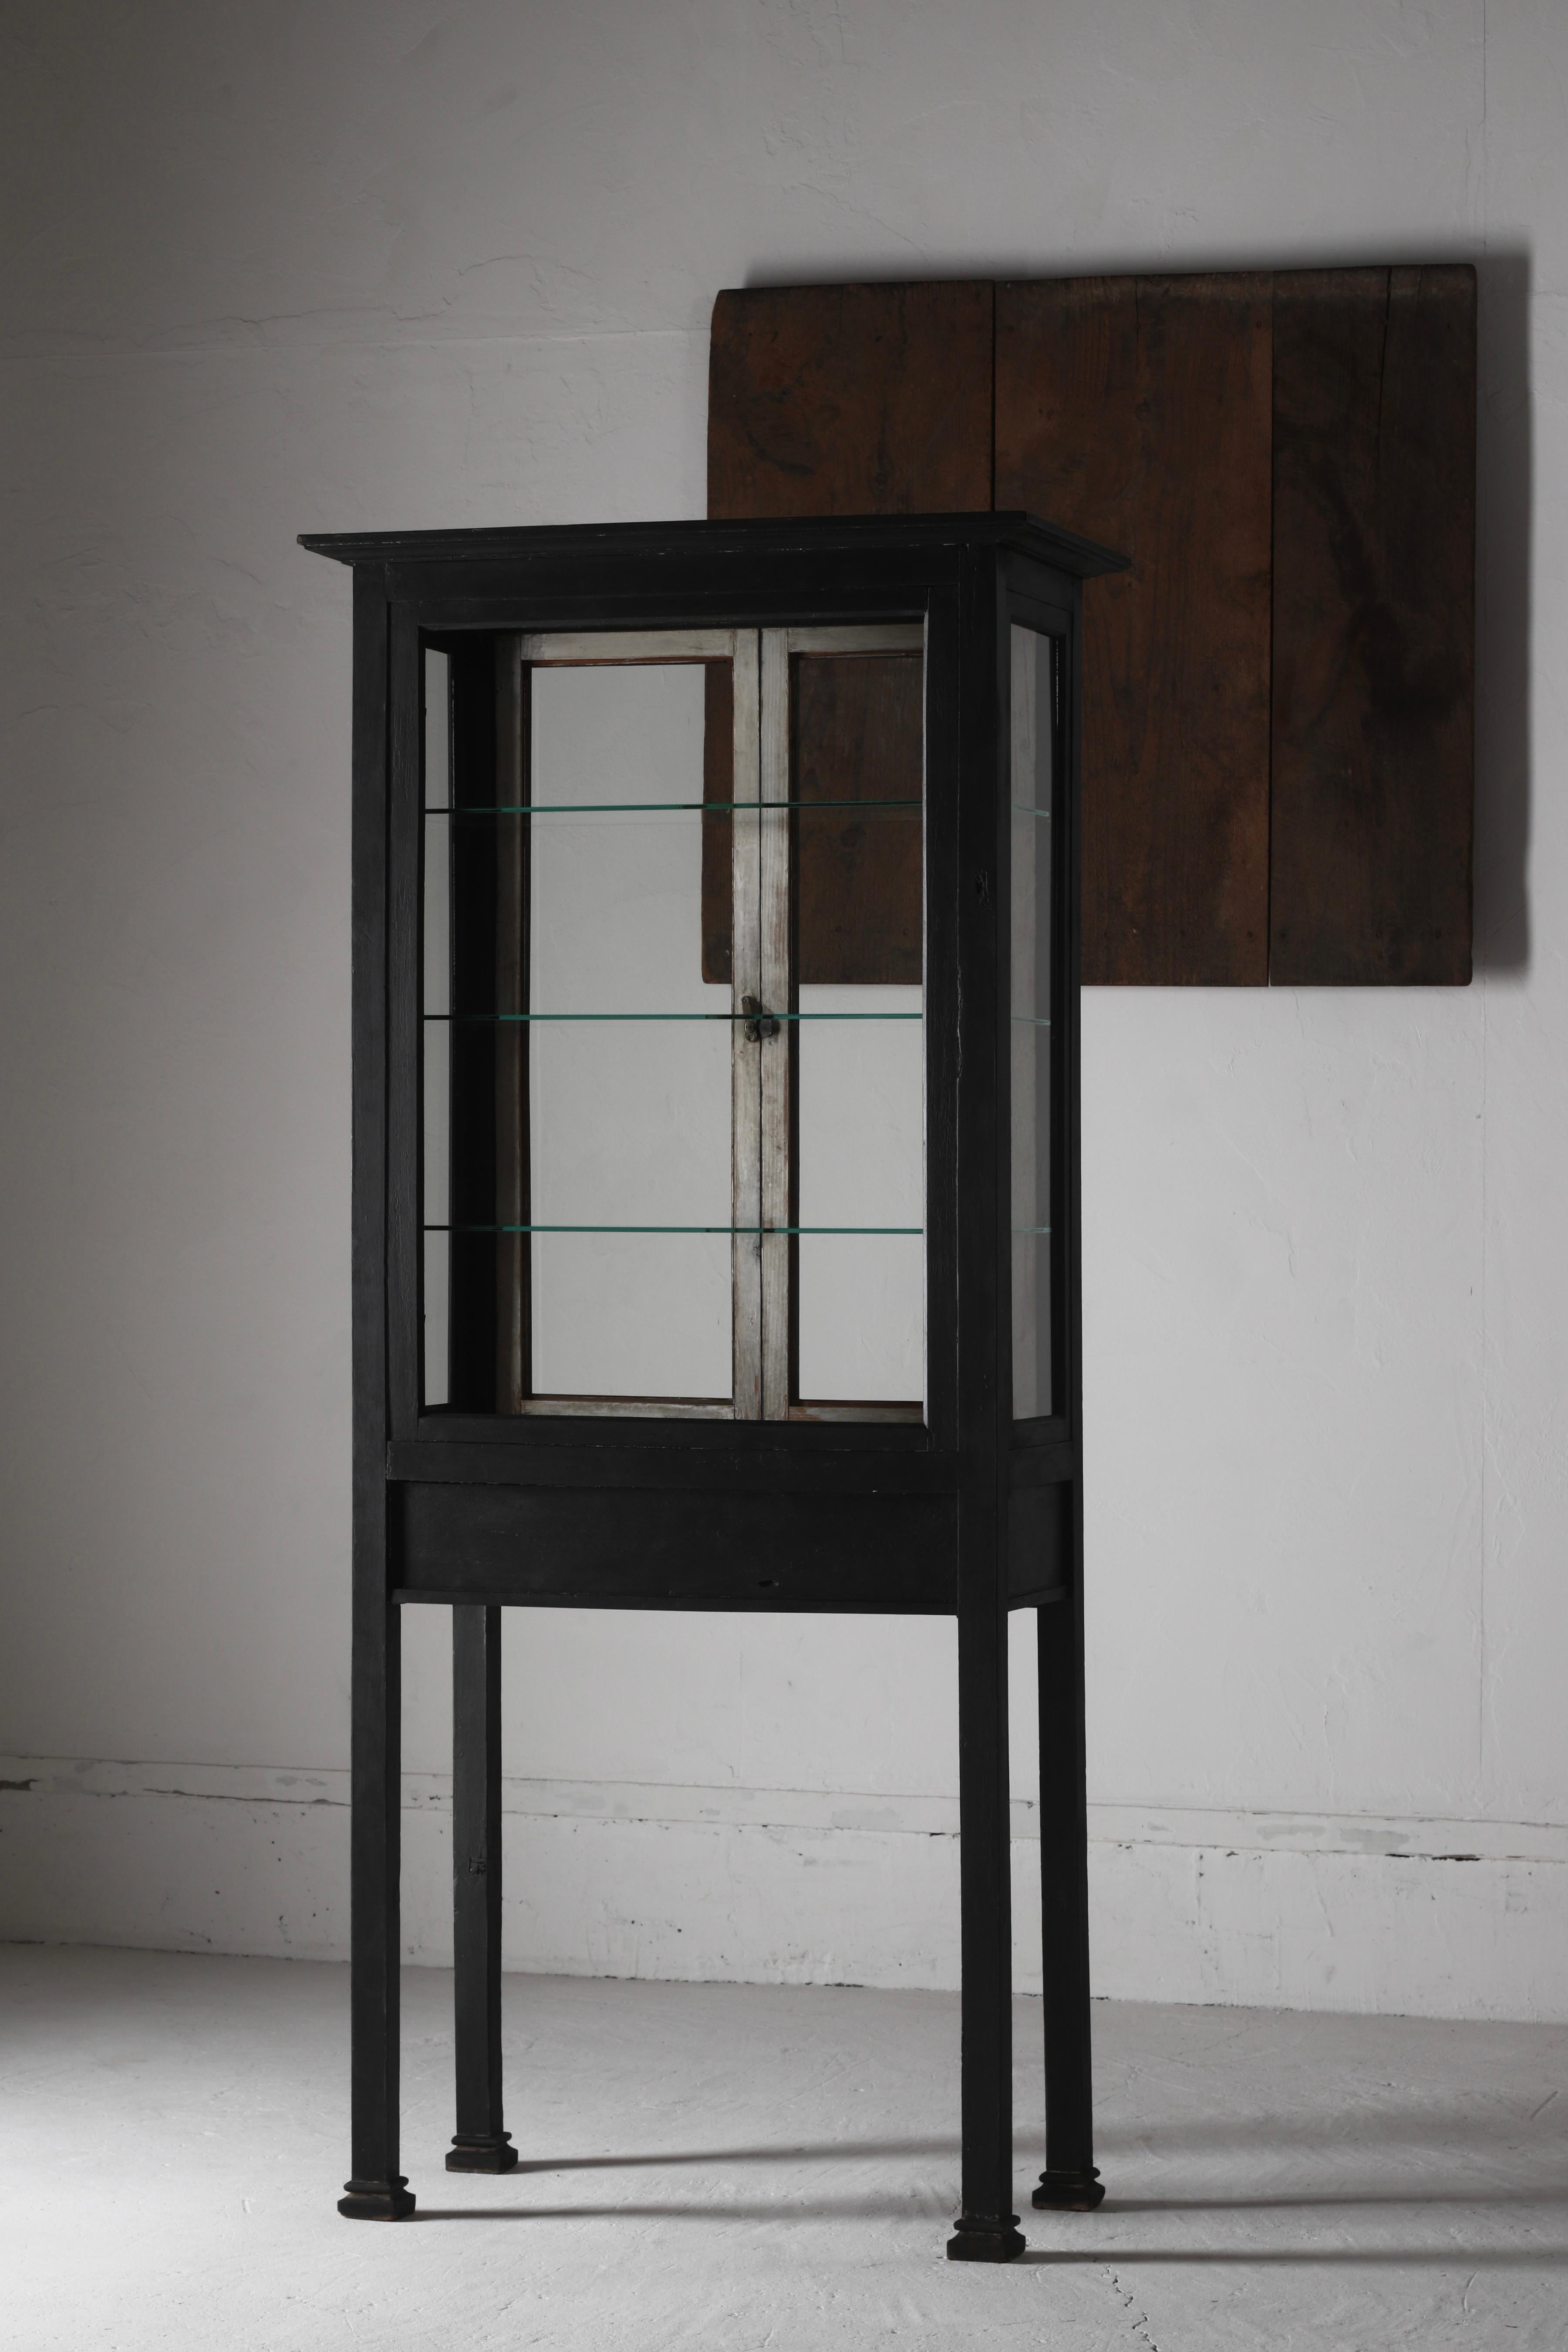 This is an old Japanese medical glass case.

It looks like a black showcase, but only the back of the door leaves an old white paint.

When you open the door, the black frame is accented with the white color of the door.

By adding white and black